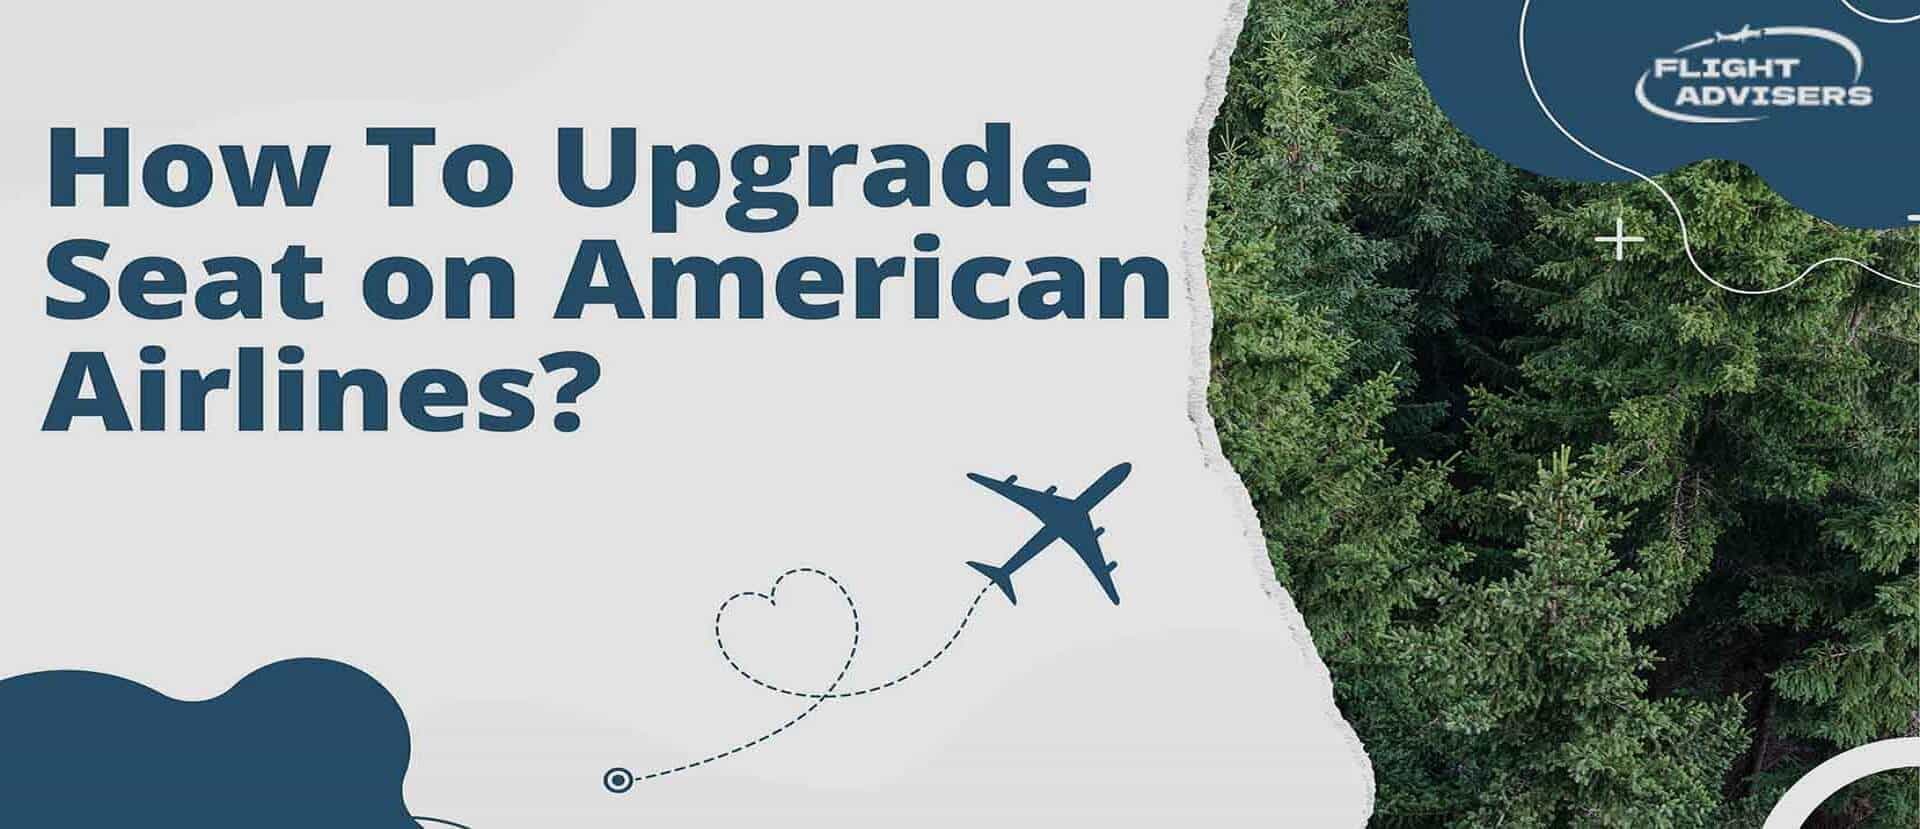 how-to-upgrade-seat-on-american-airlines